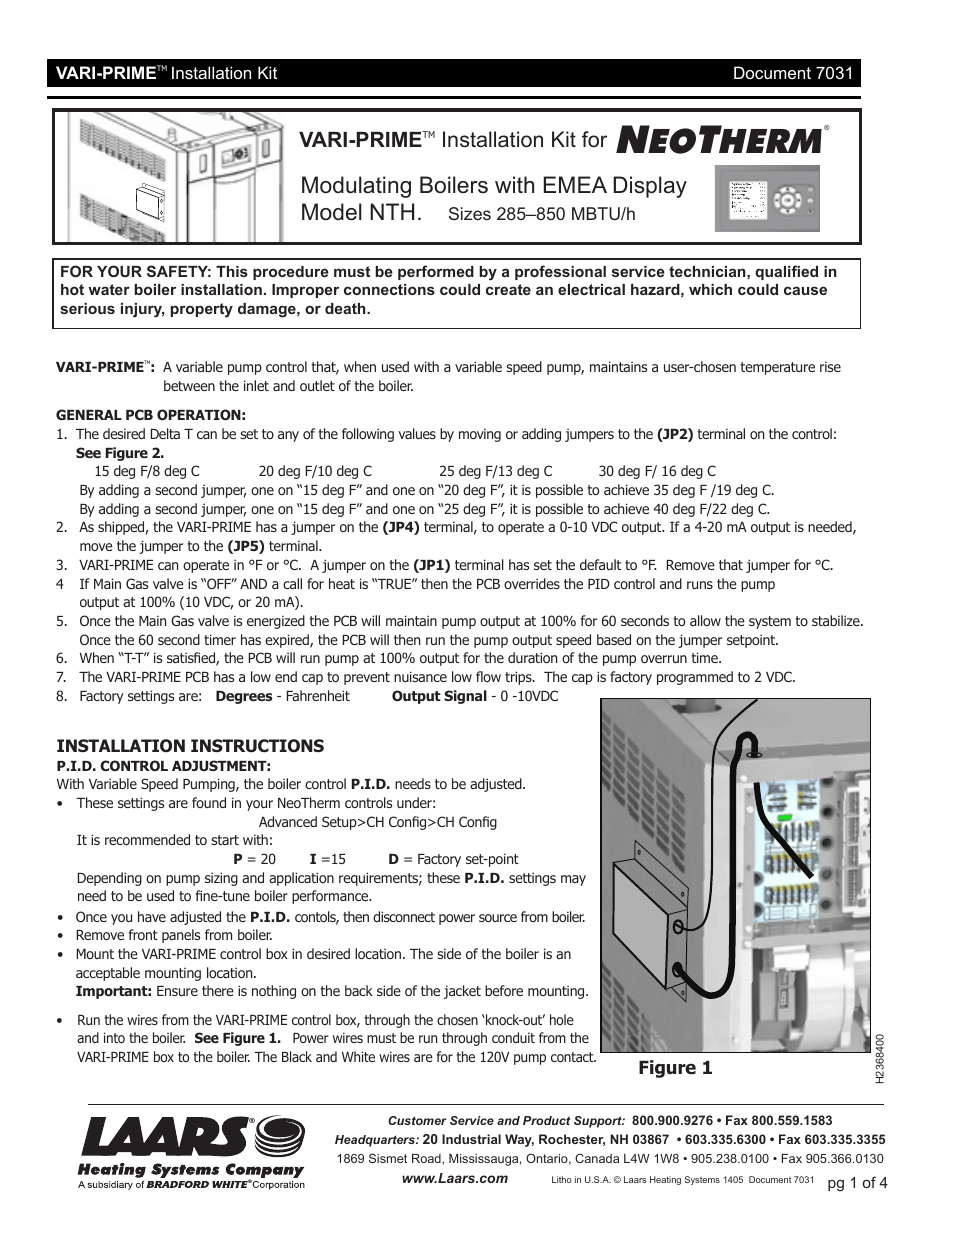 NeoTherm NTH (Sizes 285–850 MBTU/h) - Installation Manual